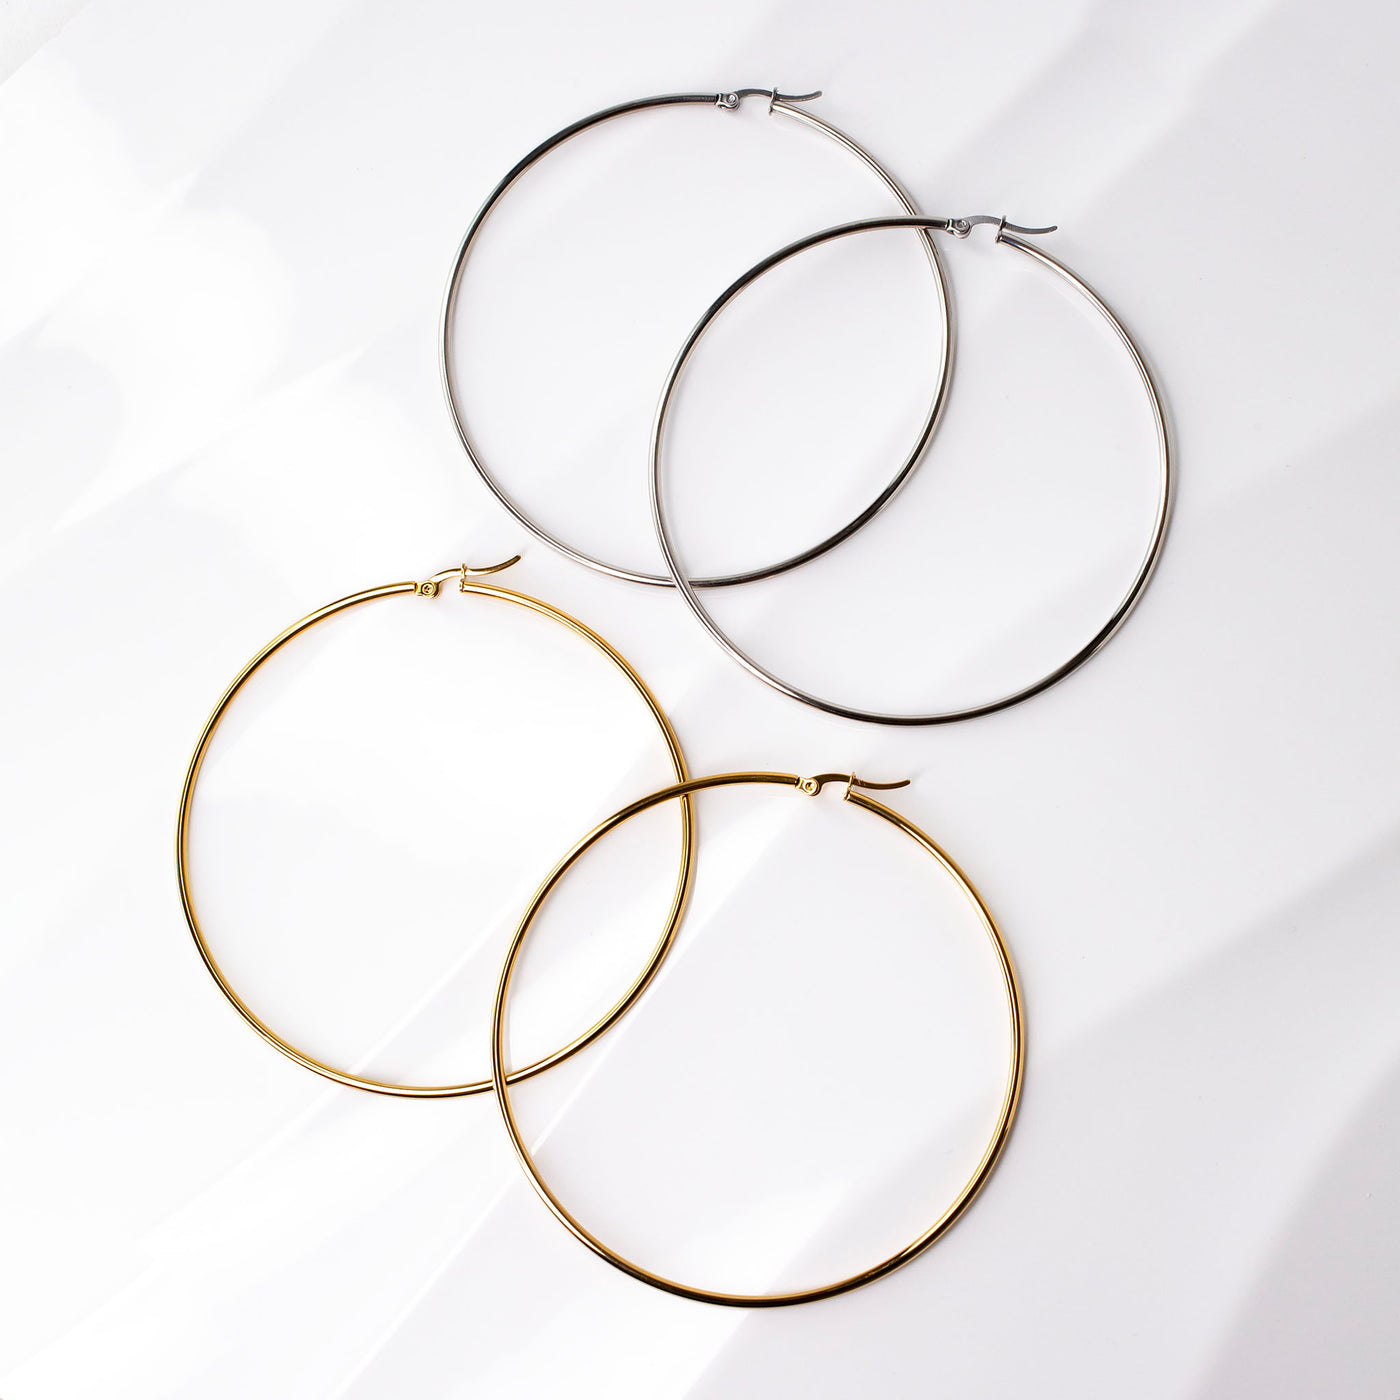 Prism High Shine Giant Hoop Earrings - Proceeds Donated